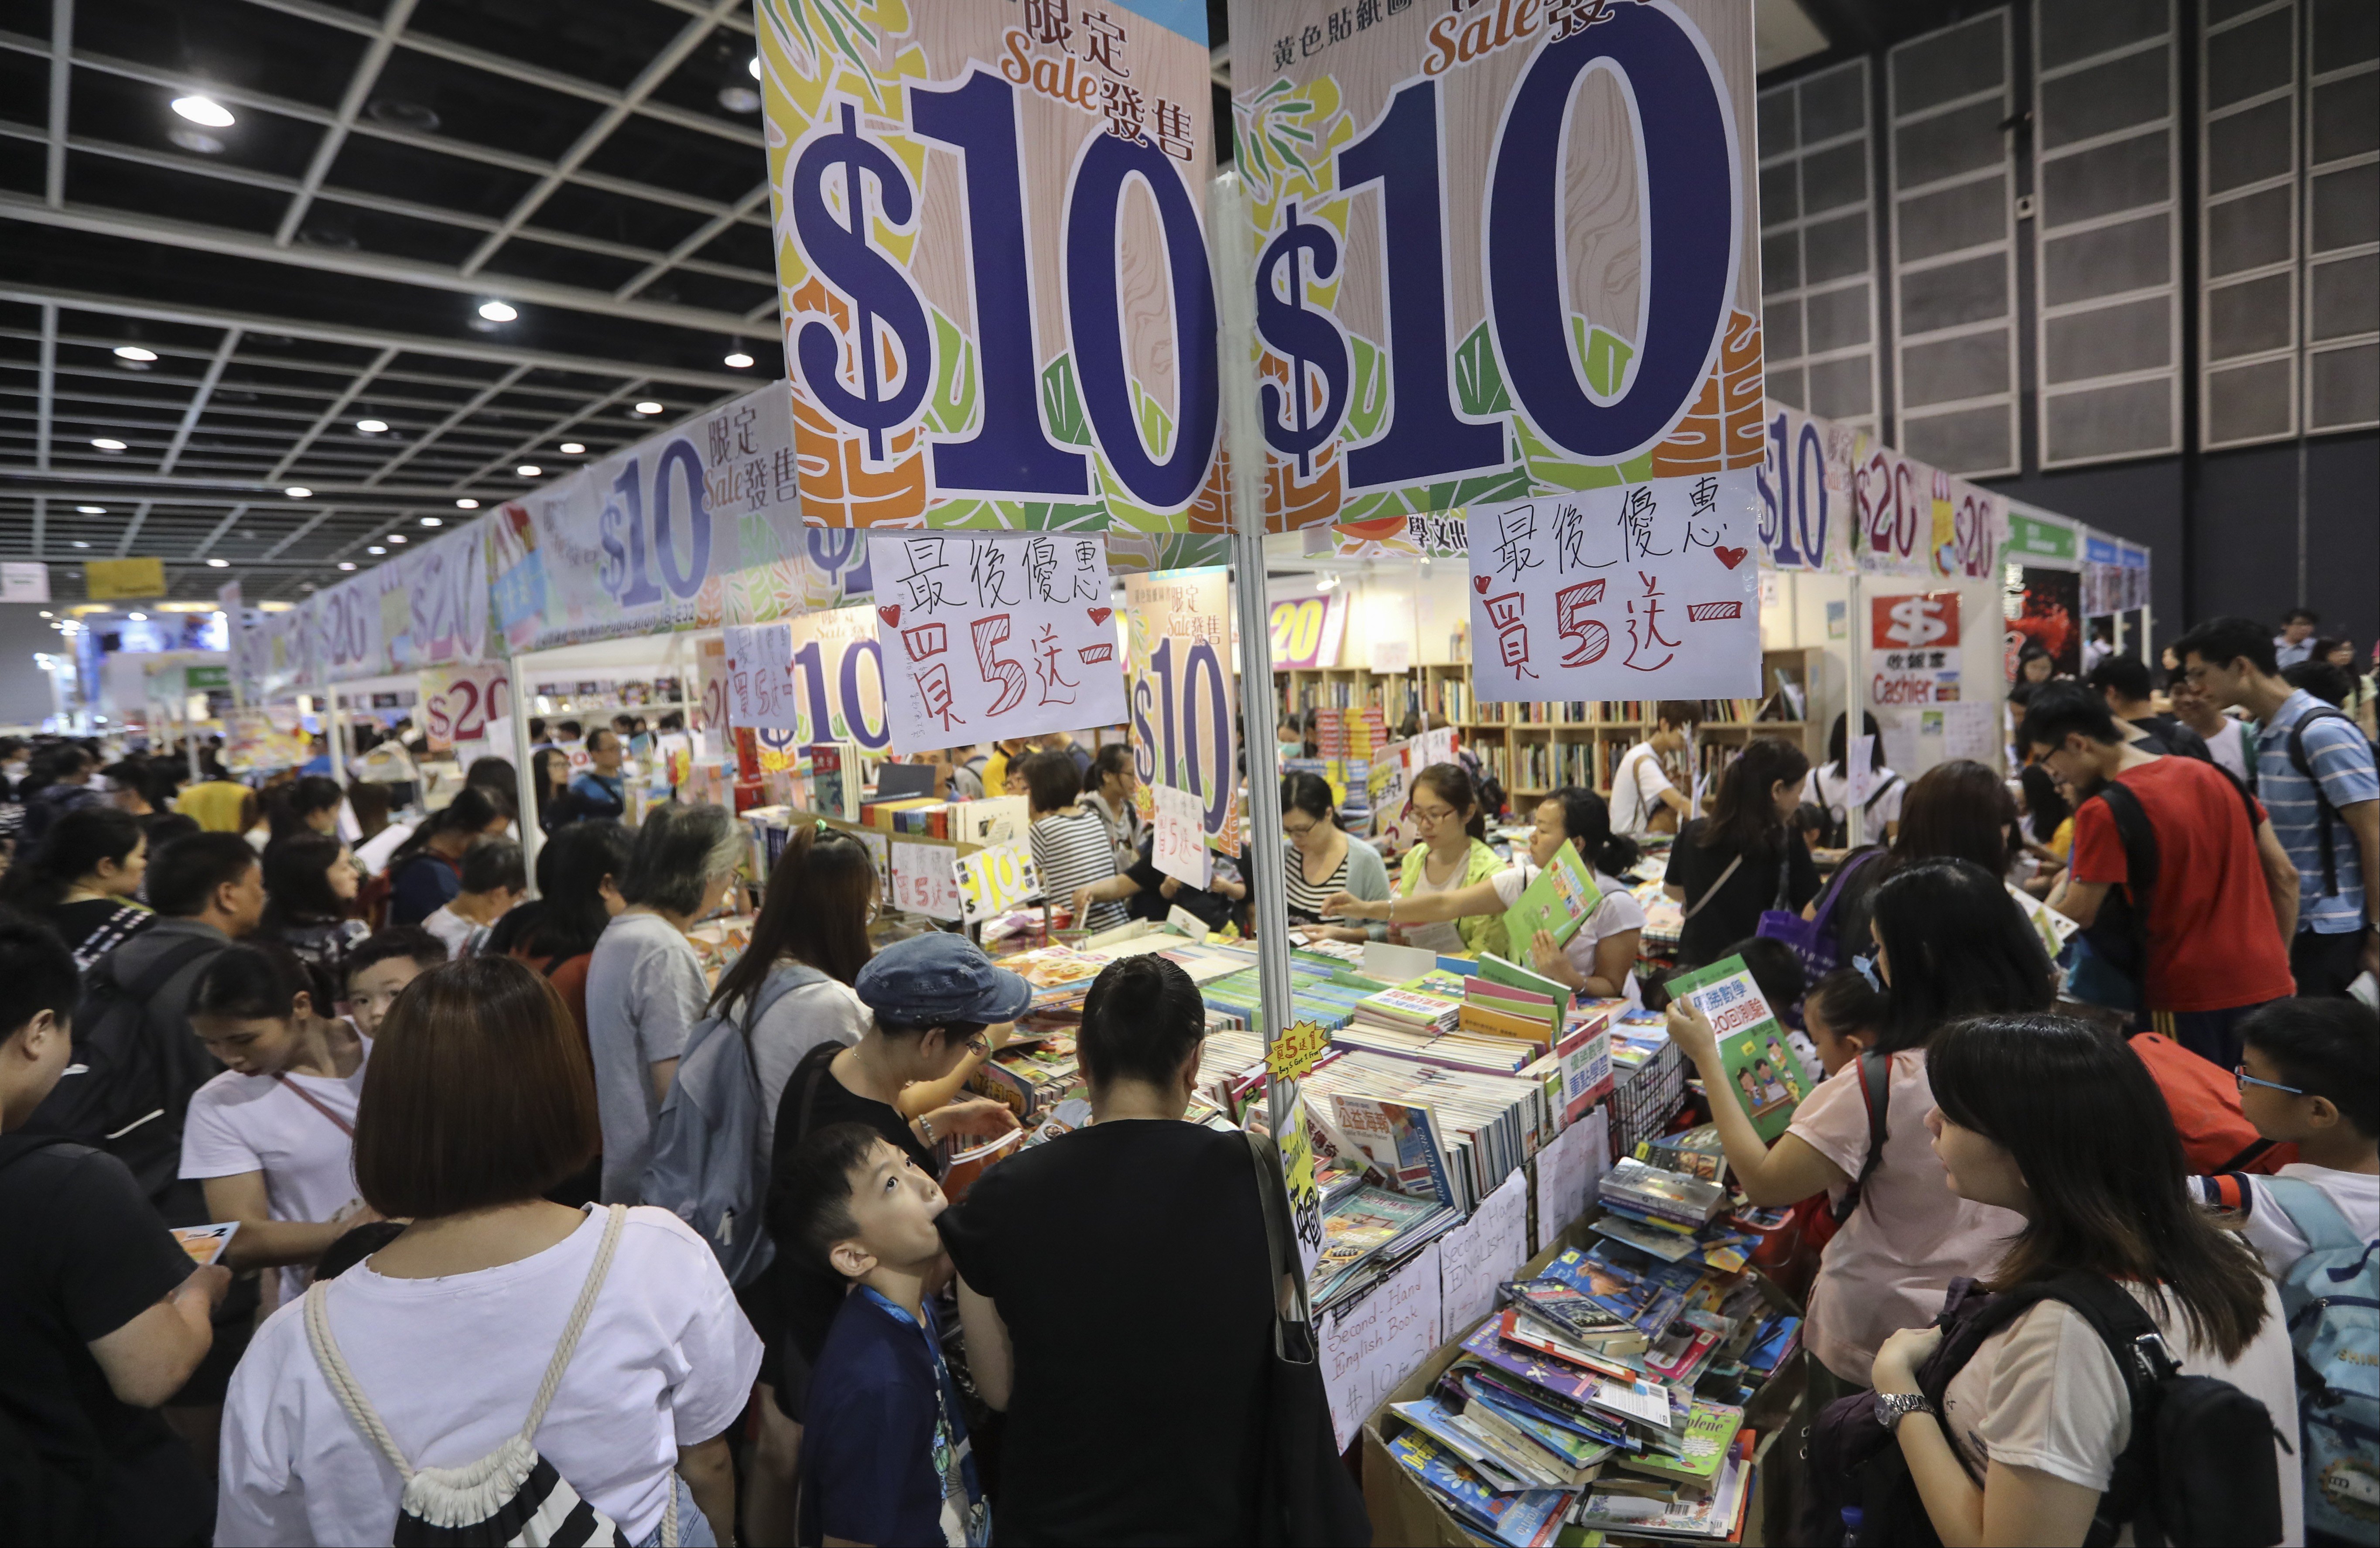 The last day of the Hong Kong Book Fair at the Hong Kong Convention and Exhibition Centre in Wan Chai. 25JUL17 SCMP / Edward Wong